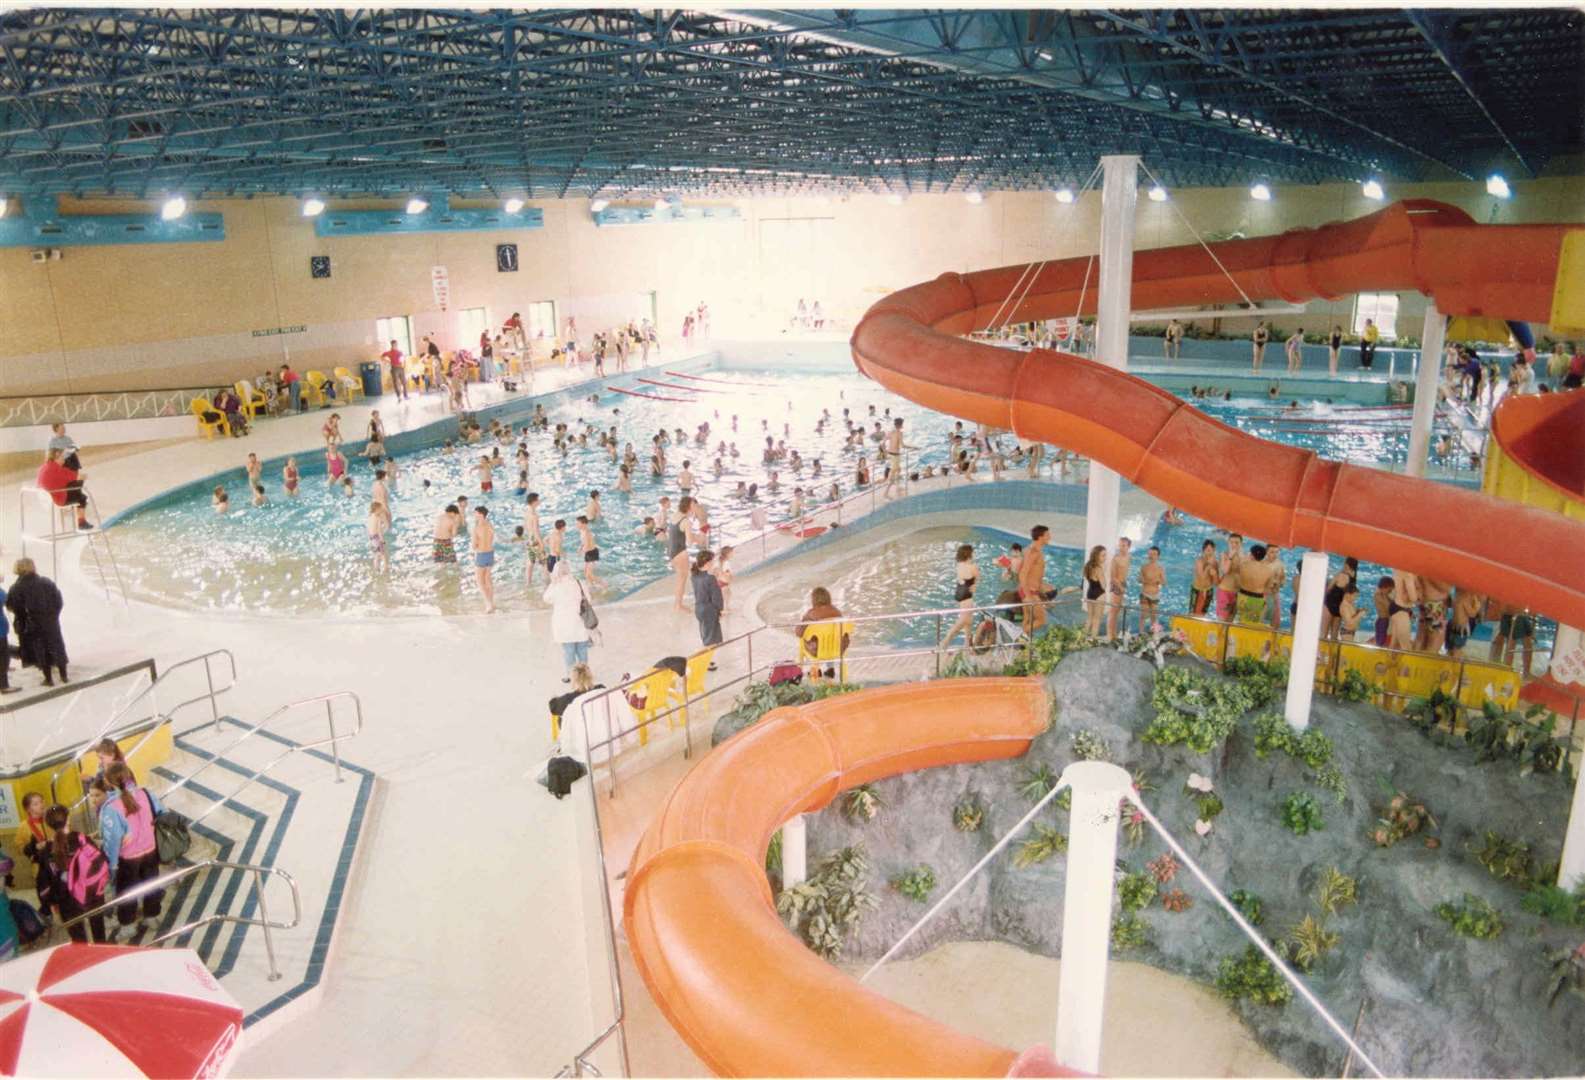 Inside the Swallows swimming pool in Sittingbourne in March 1992